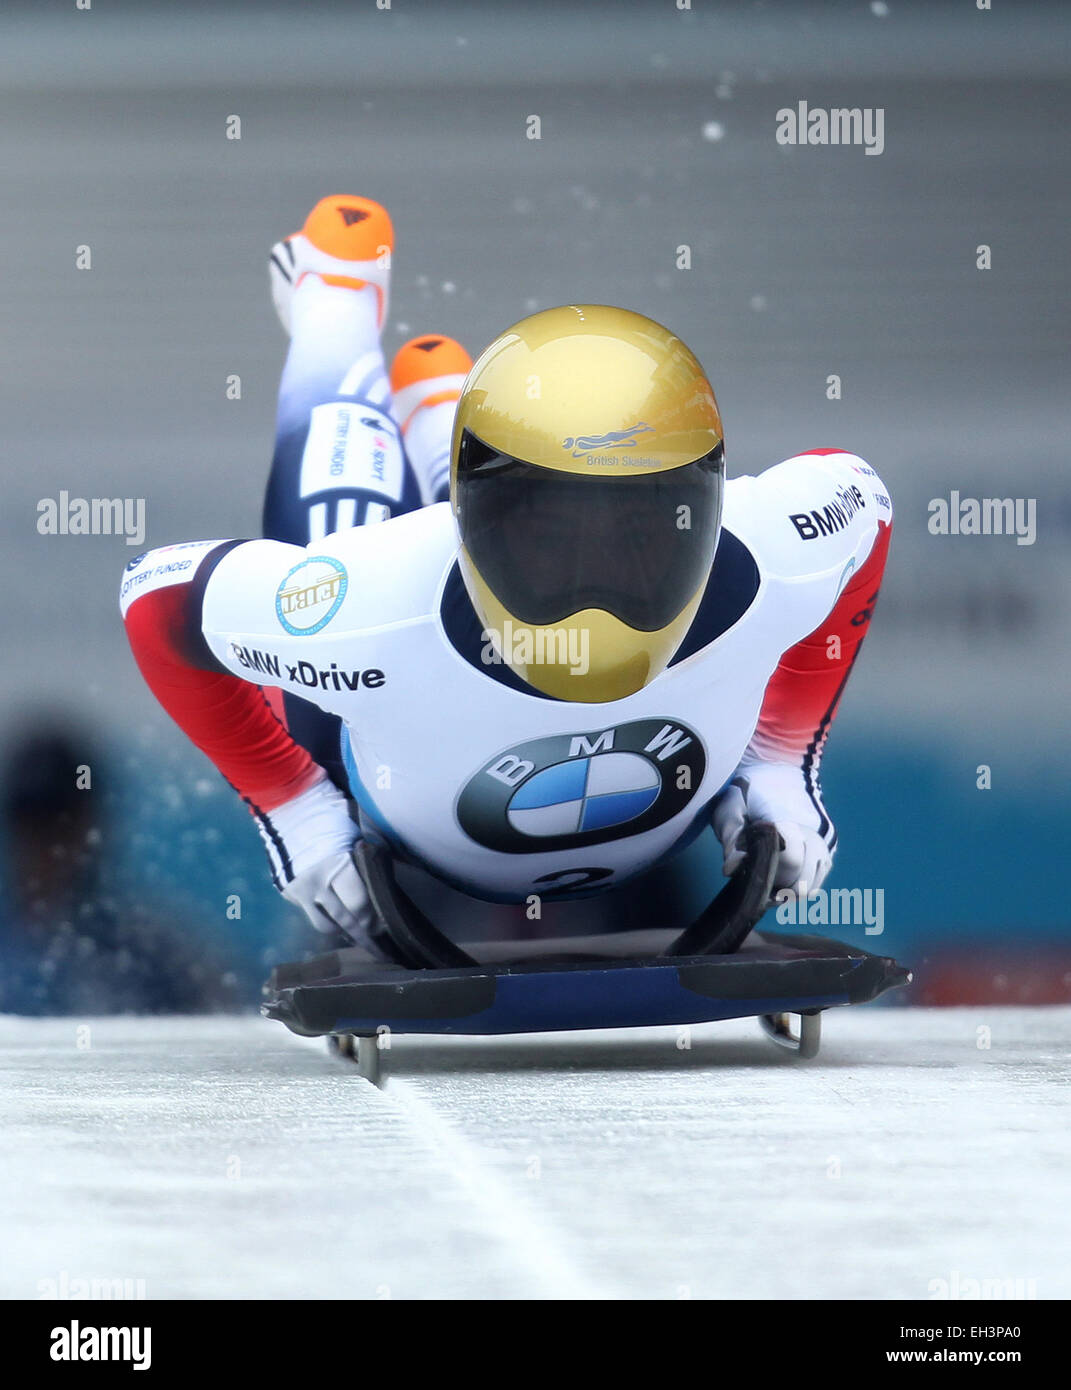 Winterberg, Germany. 06th Mar, 2015. Skeleton racer Lizzy Yarnold of Great Britain in action during the women's skeleton competition at the Bob & Skeleton World Championships 2015 in Winterberg, Germany, 06 March 2015. Photo: Ina Fassbender/dpa/Alamy Live News Stock Photo